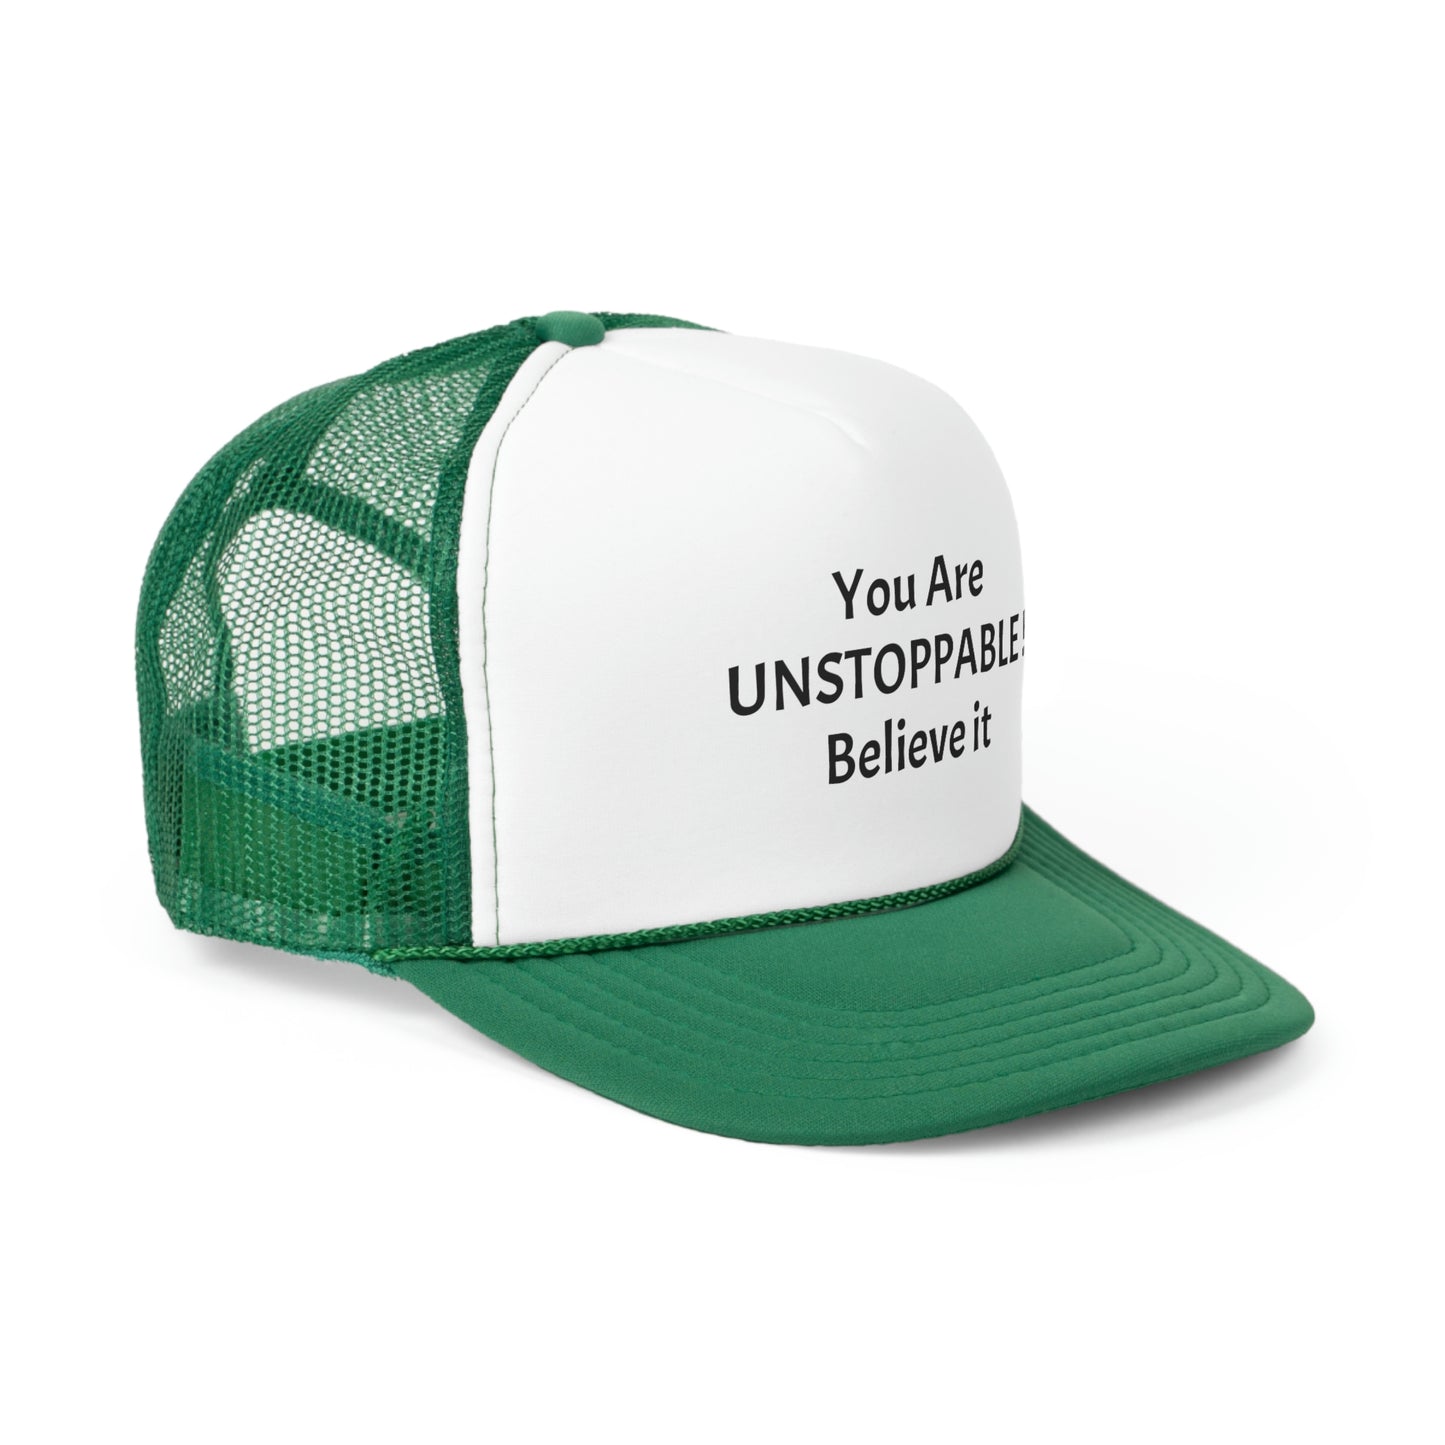 You Are Unstoppable! Trucker cap.